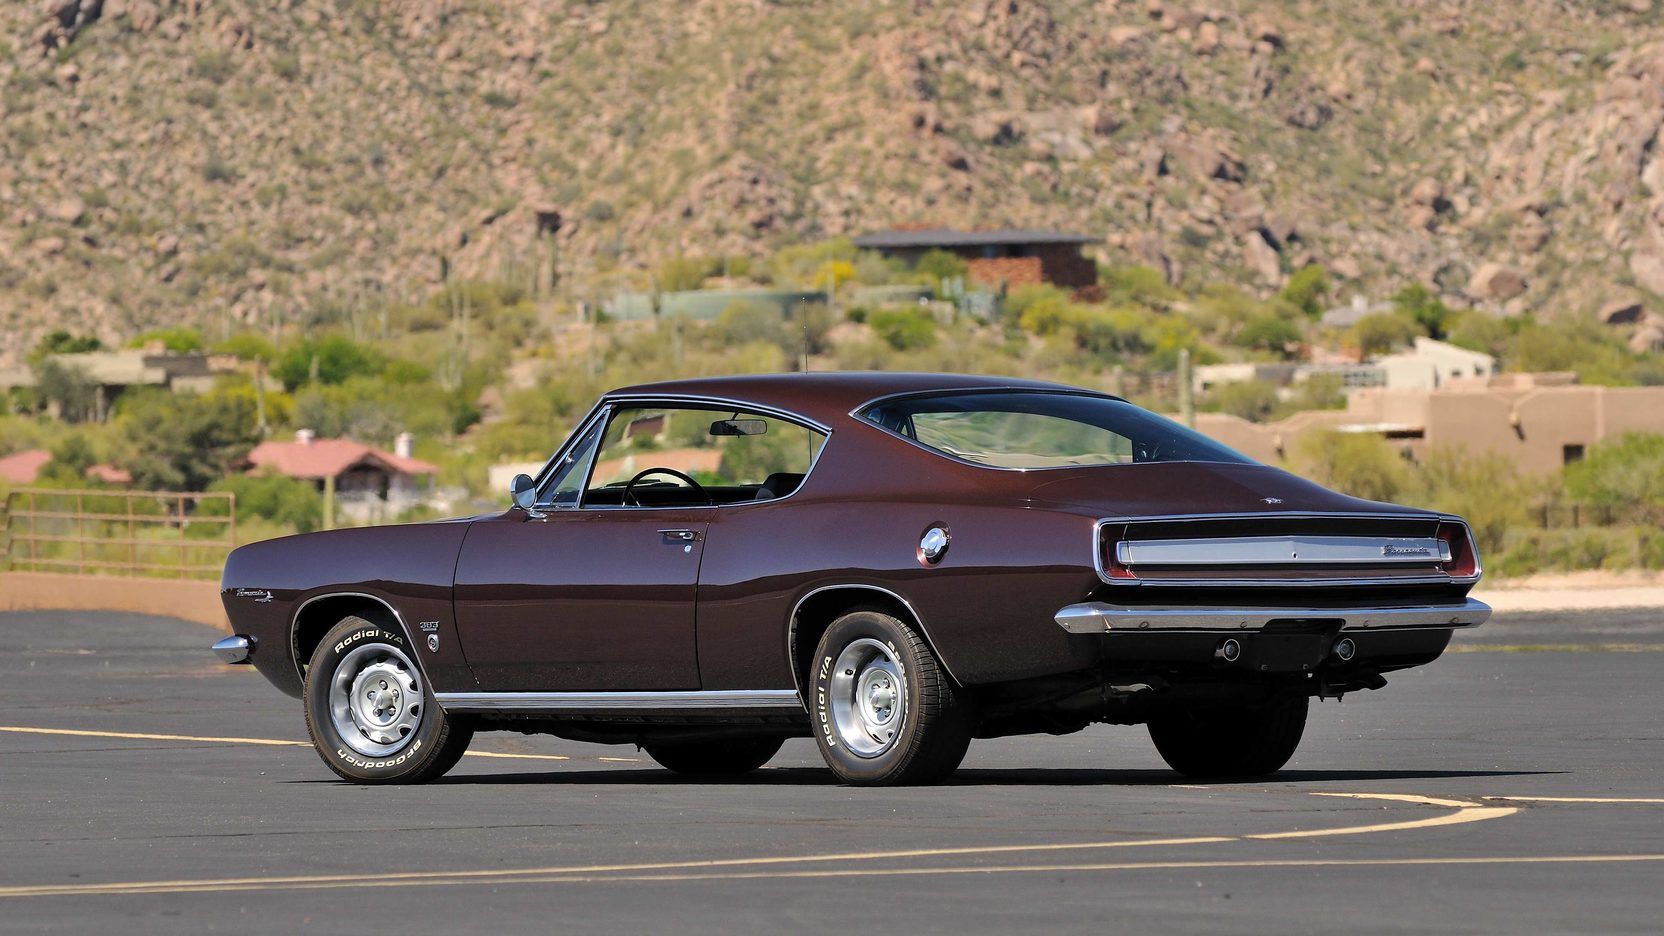 This 1967 Plymouth Barracuda is one of the best first muscle cars